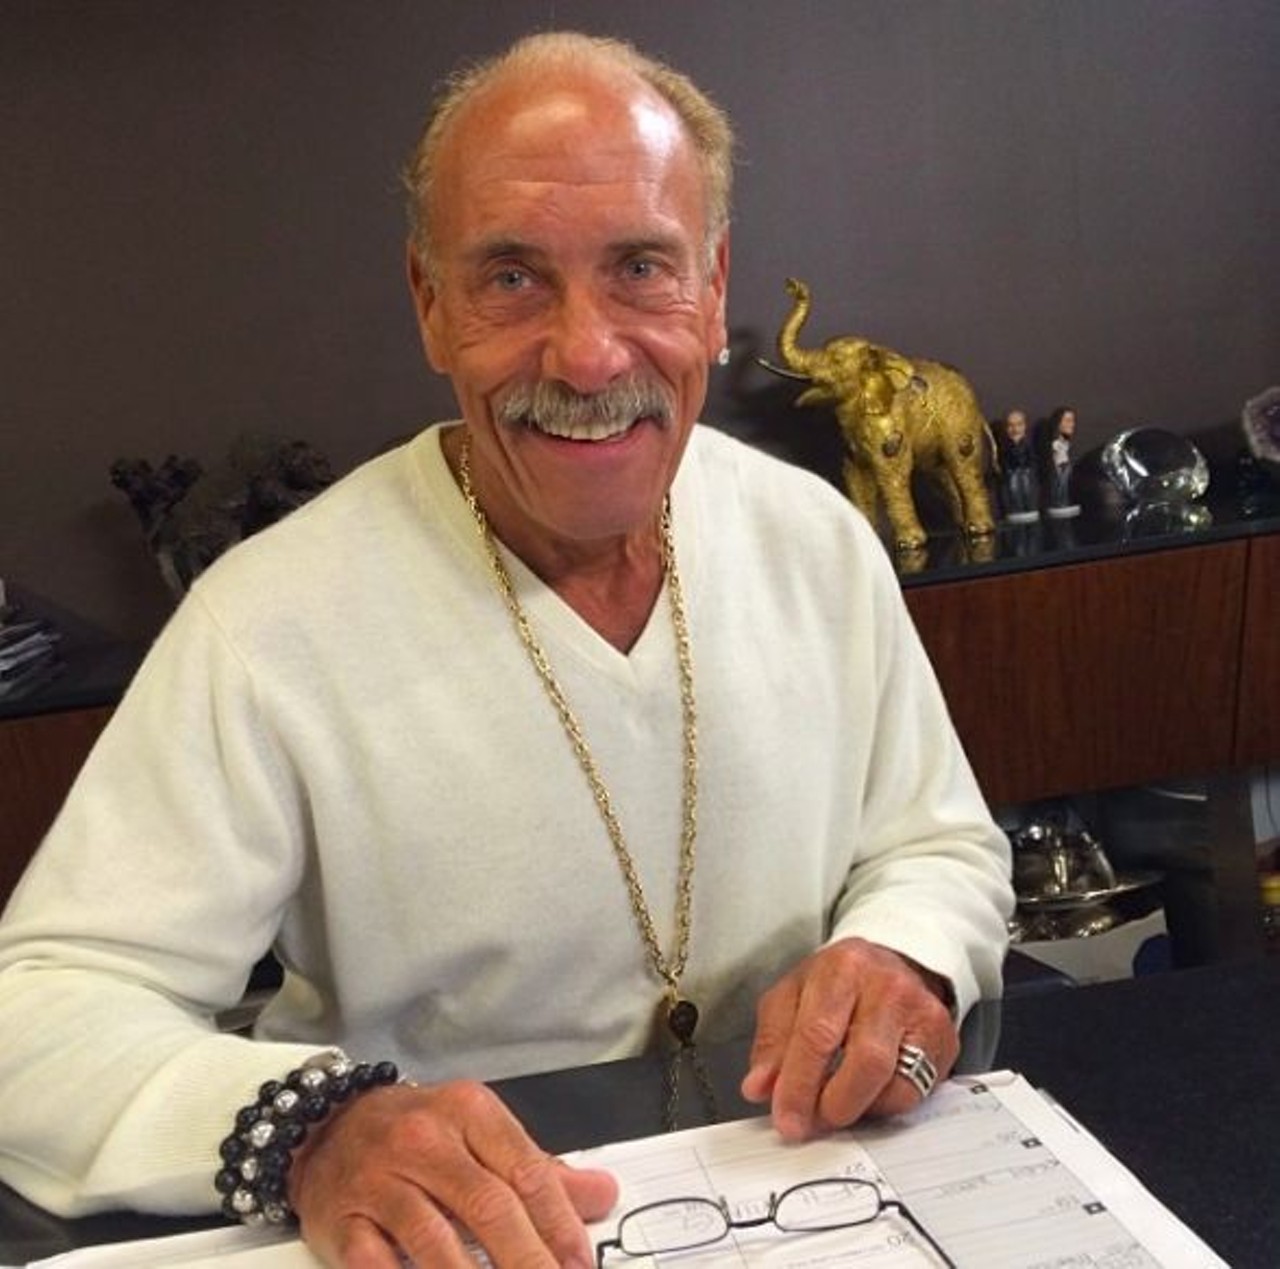 Les Gold
Photo via Instagram
As a pawnbroker and reality TV personality, Les Gold is the star of Hardcore Pawn. The chaotic, yet entertaining reality show portrays what goes on inside Detroit&#146;s pawn shop American Jewelry and Loan.
cameo.com/lesg